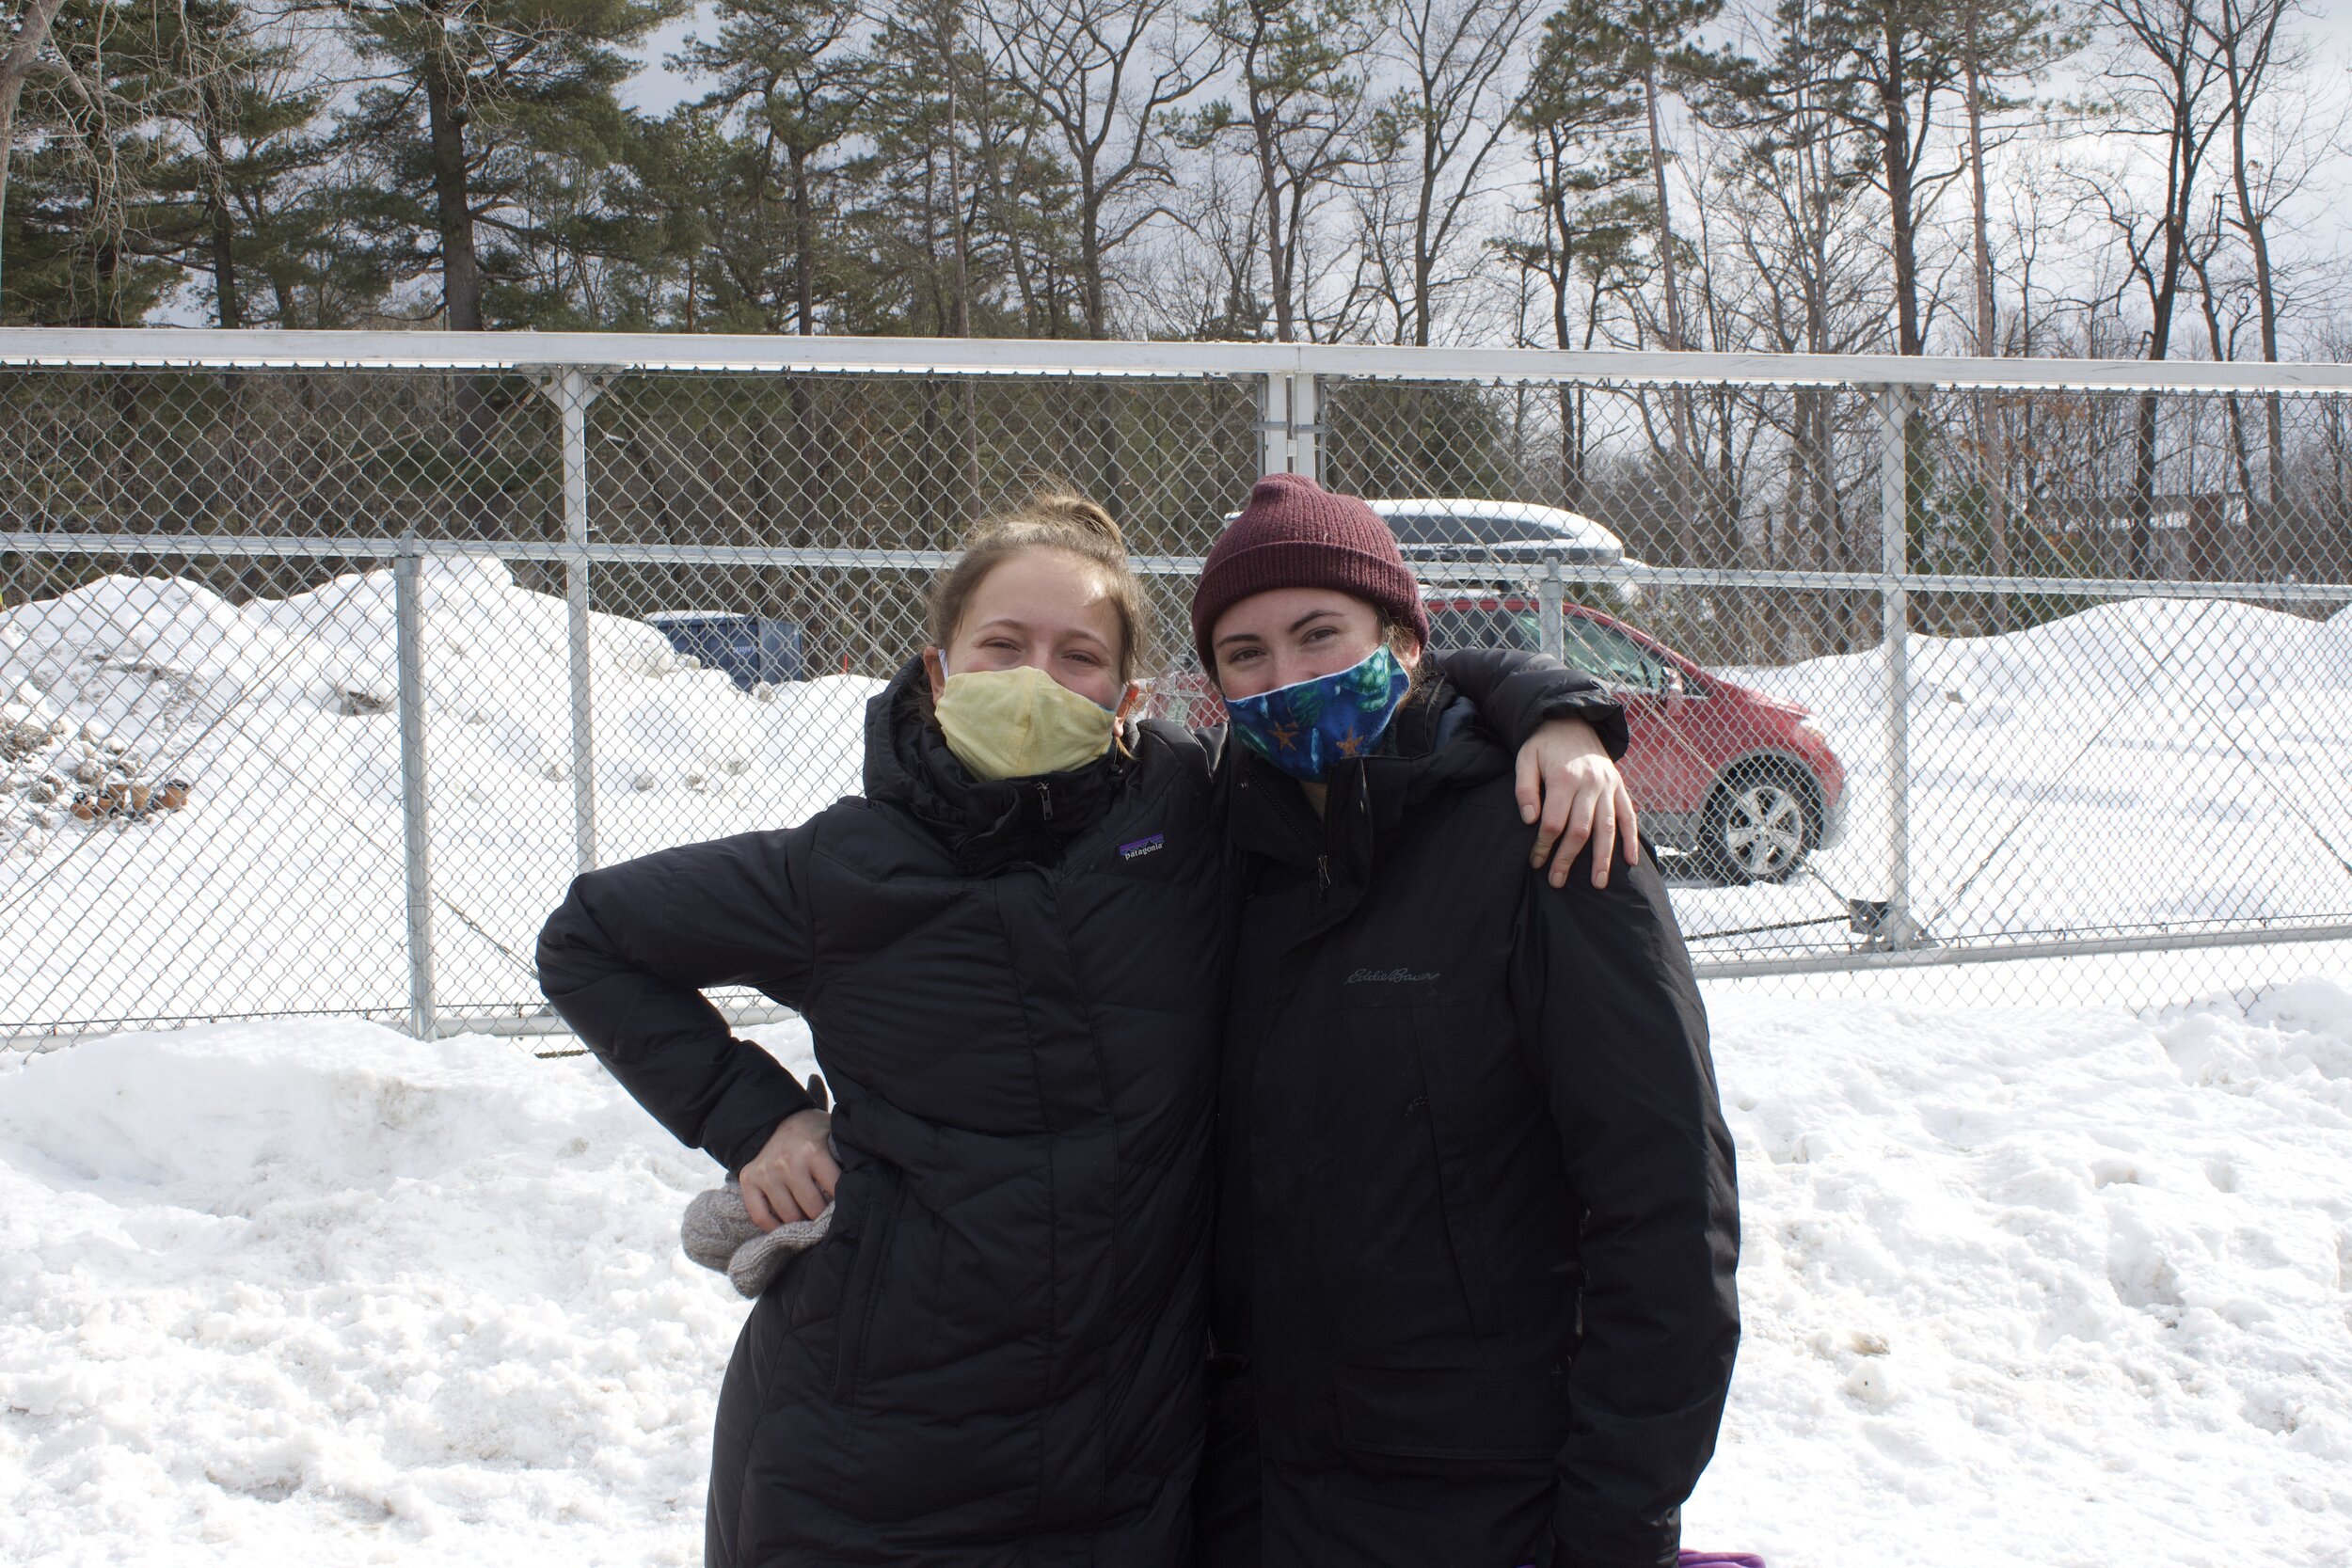   Best friends Becca Heine and Jessie Pearce are eager to get their skis on and go!  